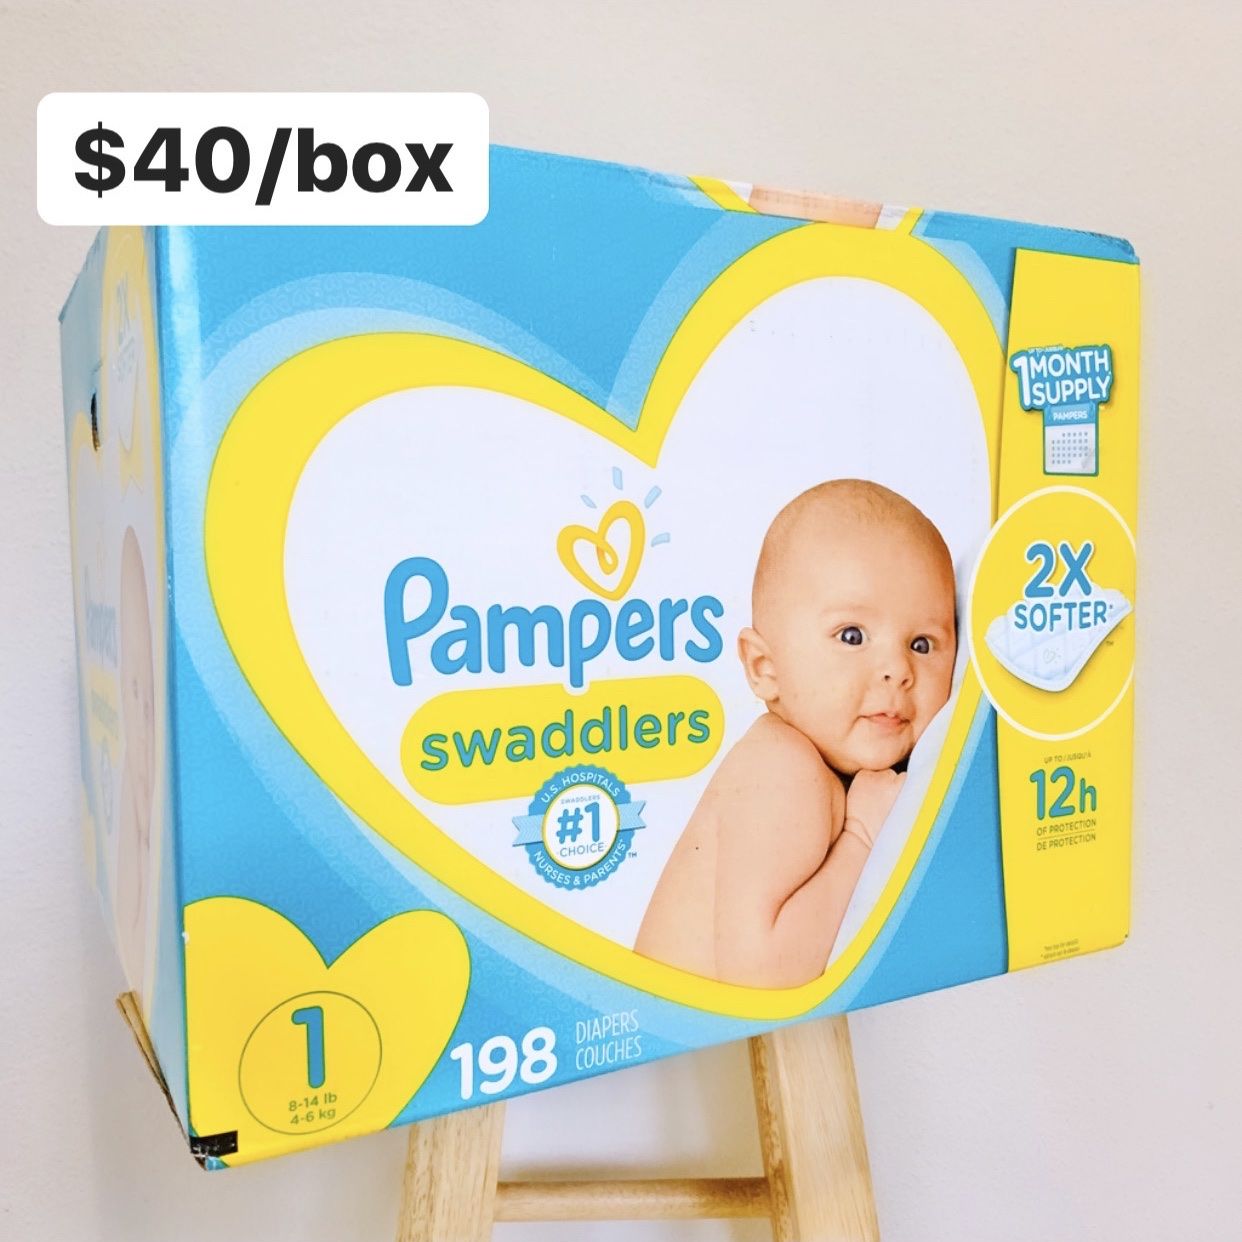 Size 1 (8-14 lbs) Pampers Swaddlers (198 baby diapers) *PROMO* BUY ANY 2 PAMPERS BRAND BIG BOXES, GET 1 FREE HUGGIES TUB 64ct